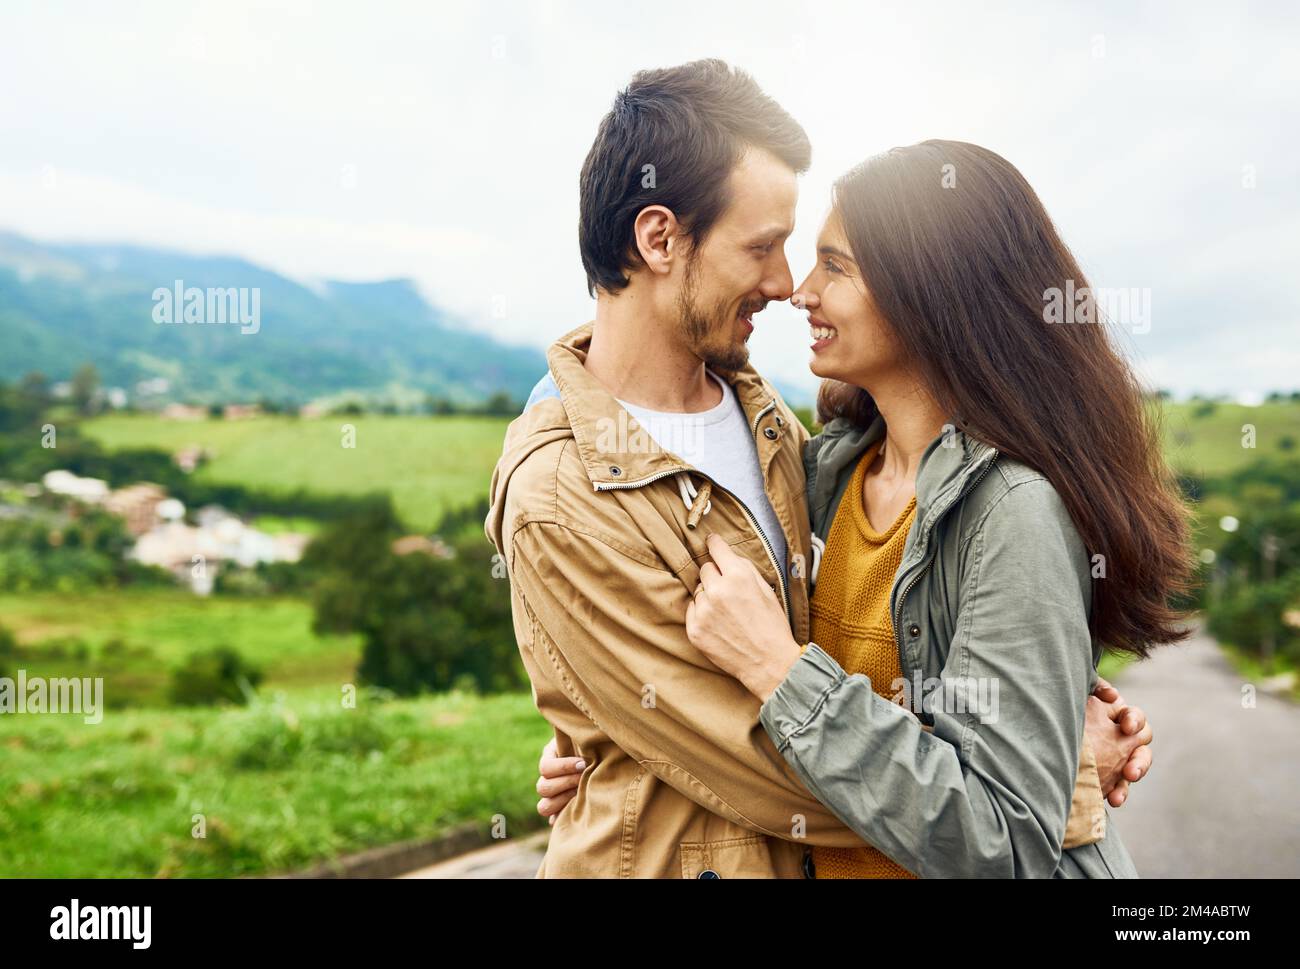 I love you the most. an affectionate young couple outdoors. Stock Photo